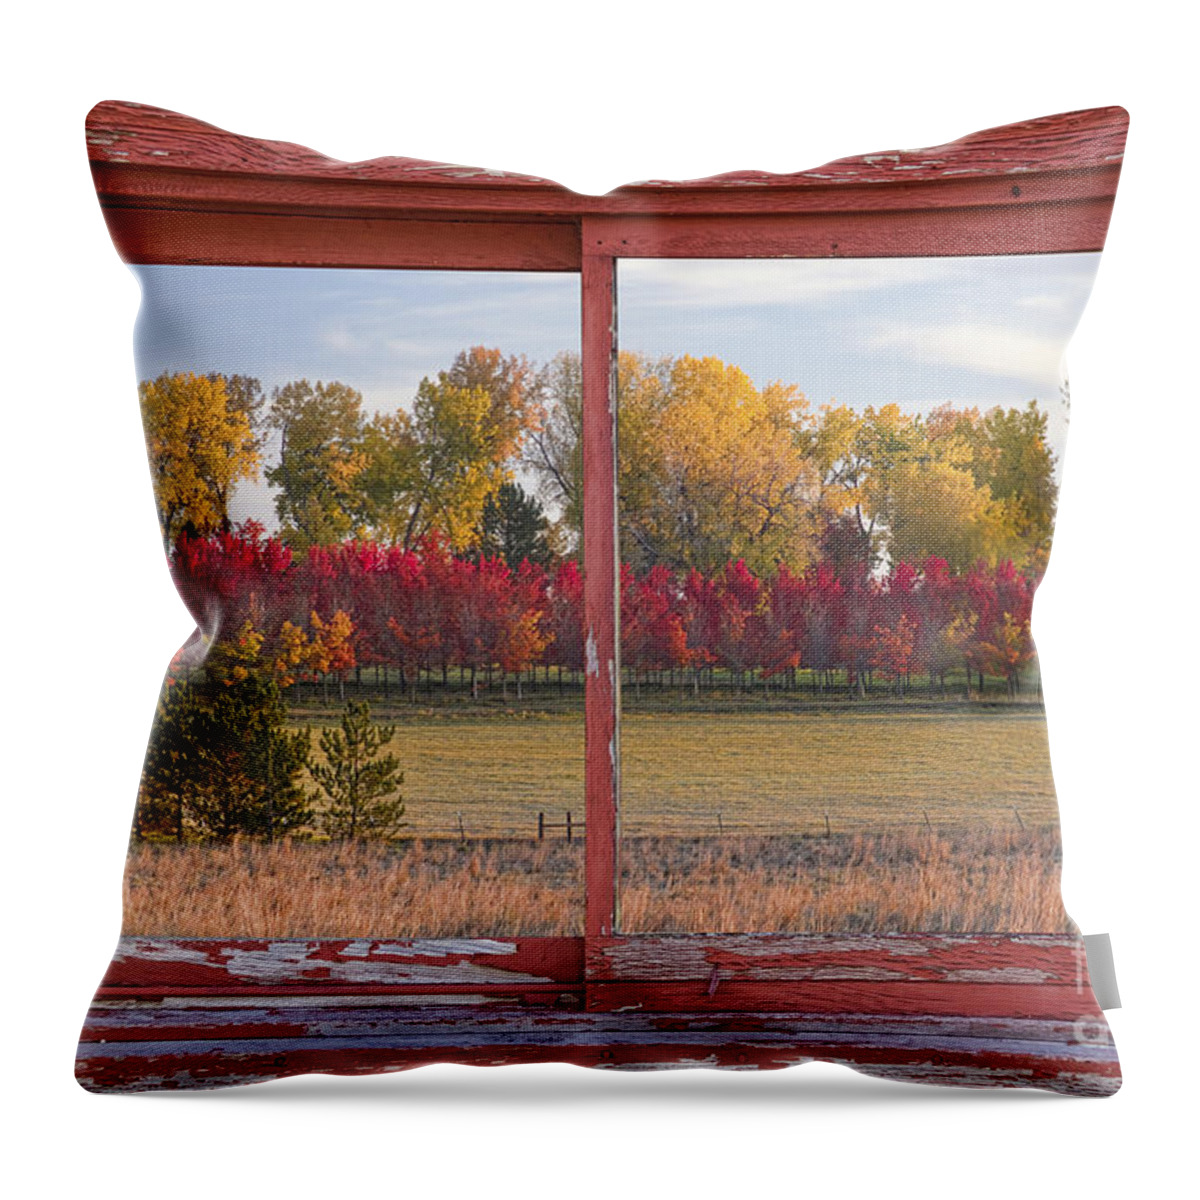 Picture Throw Pillow featuring the photograph Rural Country Autumn Scenic Window View by James BO Insogna